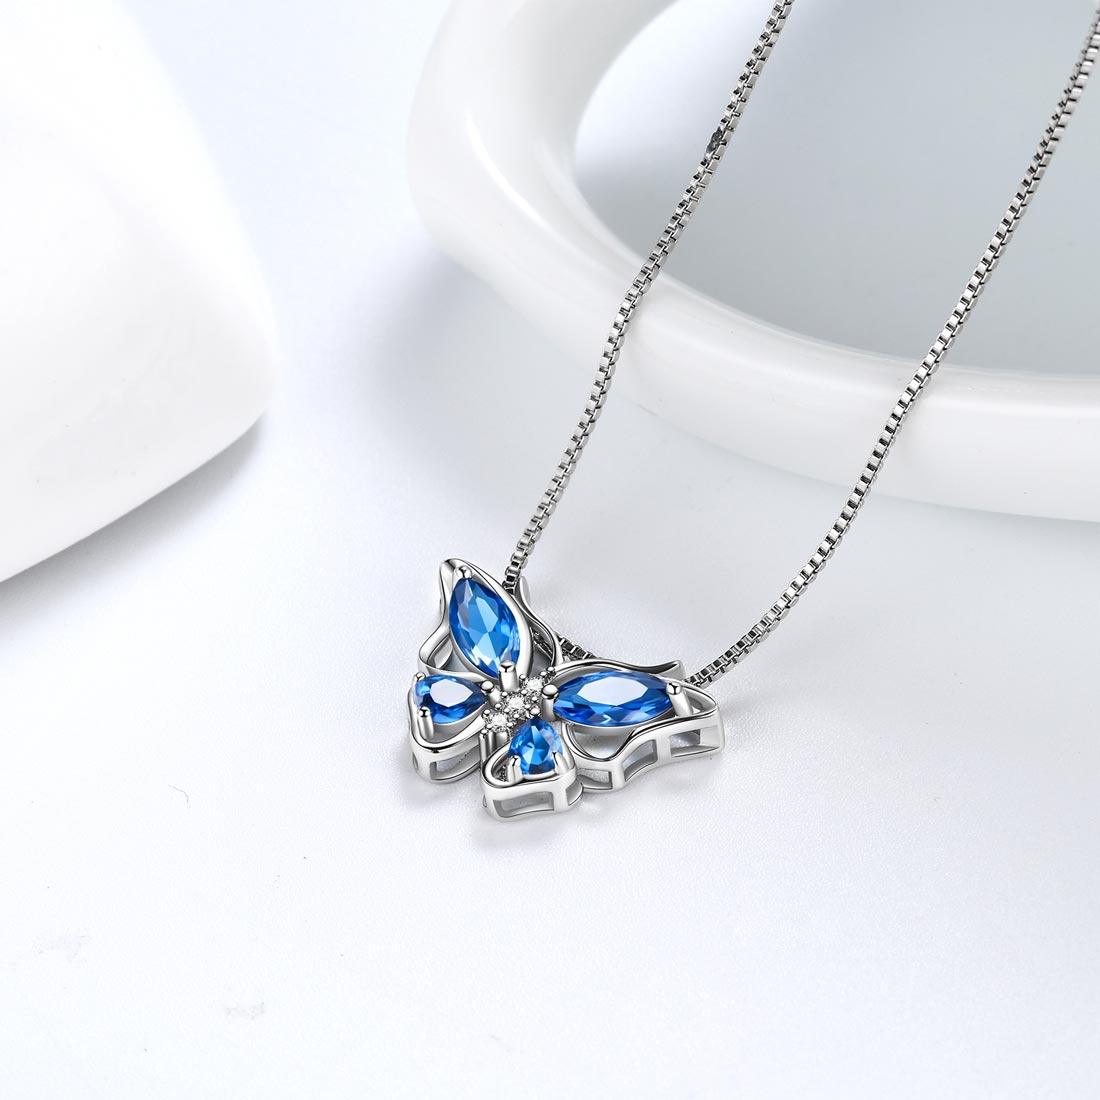 Butterfly Pendant Necklace Birthstone September Sapphire - Necklaces - Aurora Tears